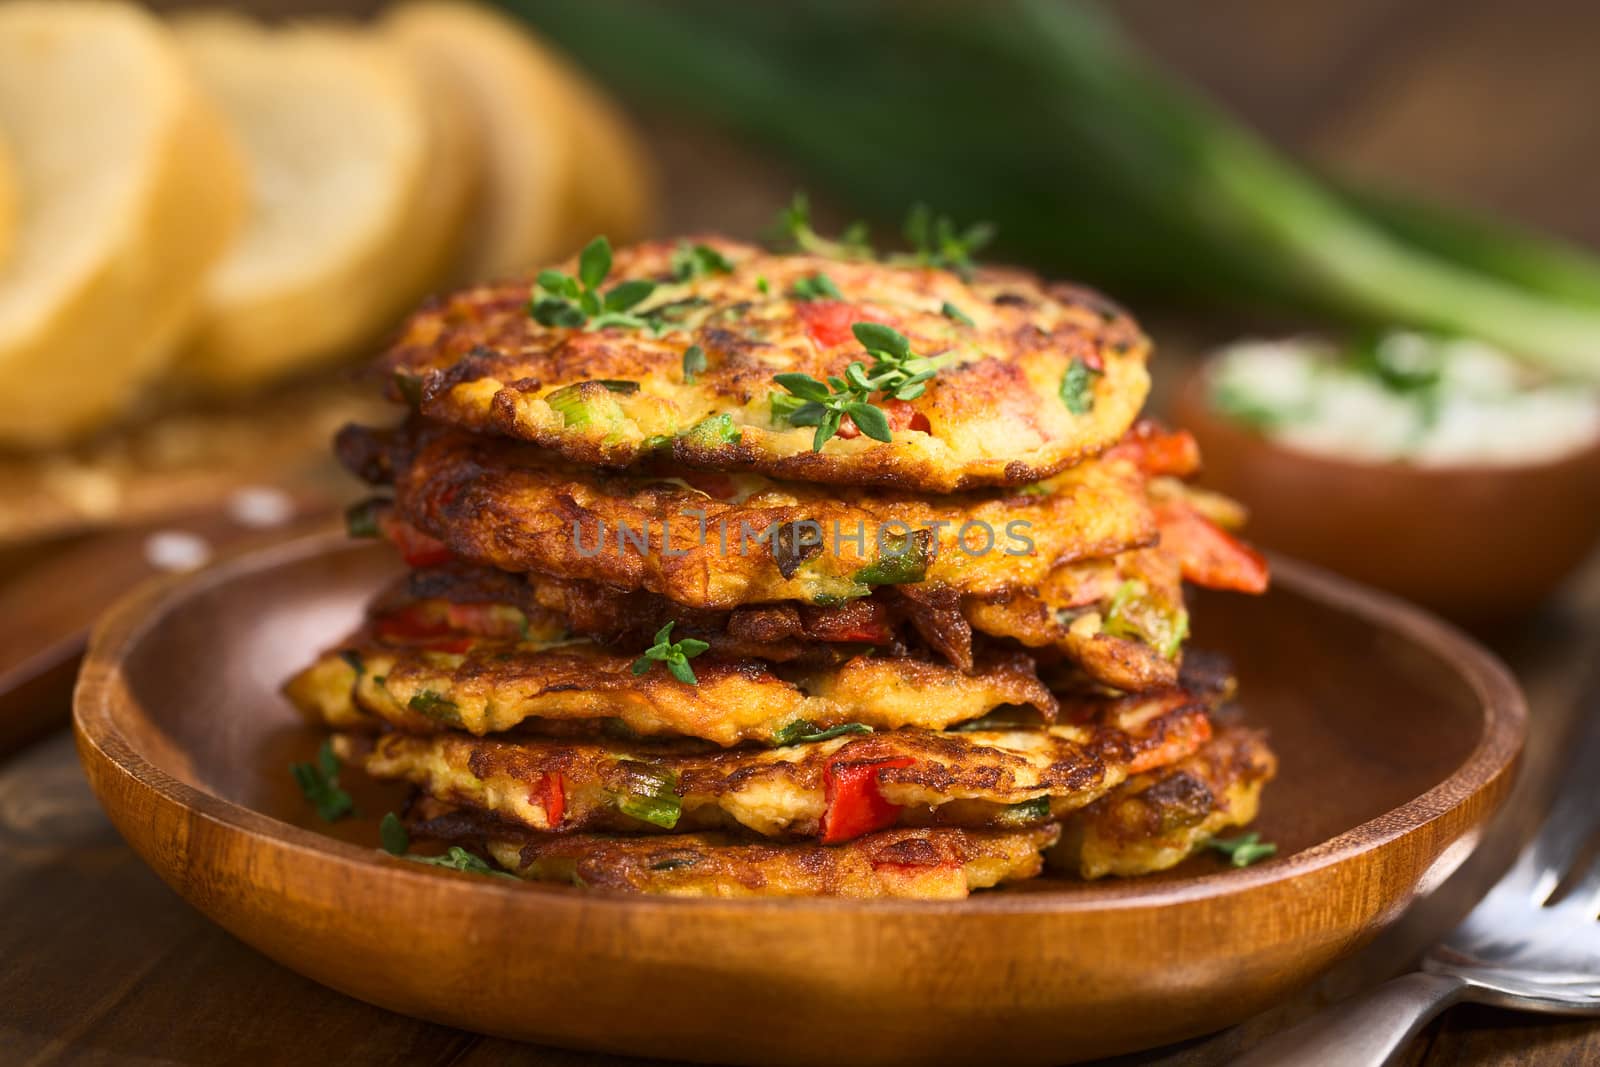 Zucchini and Bell Pepper Fritter by ildi